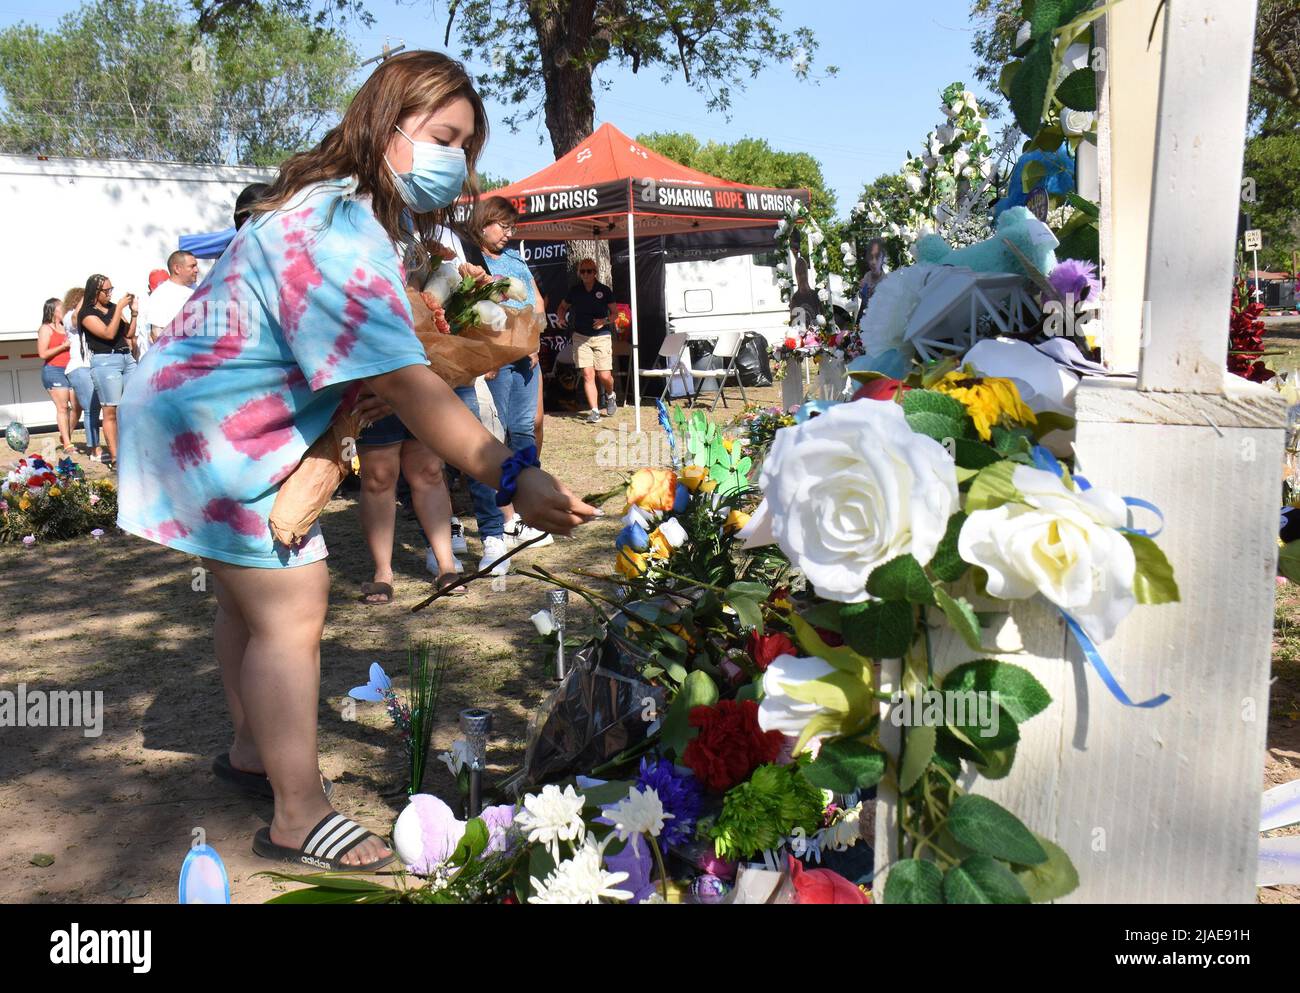 Uvalde, United States. 30th May, 2022. Mourners gather at a memorial of flowers at Robb Elementary School in Uvalde, Texas on Sunday, May 29, 2022. A mass shooting days before left 19 children and two adults dead at the elementary school. Photo by Jon Farina/UPI Credit: UPI/Alamy Live News Stock Photo